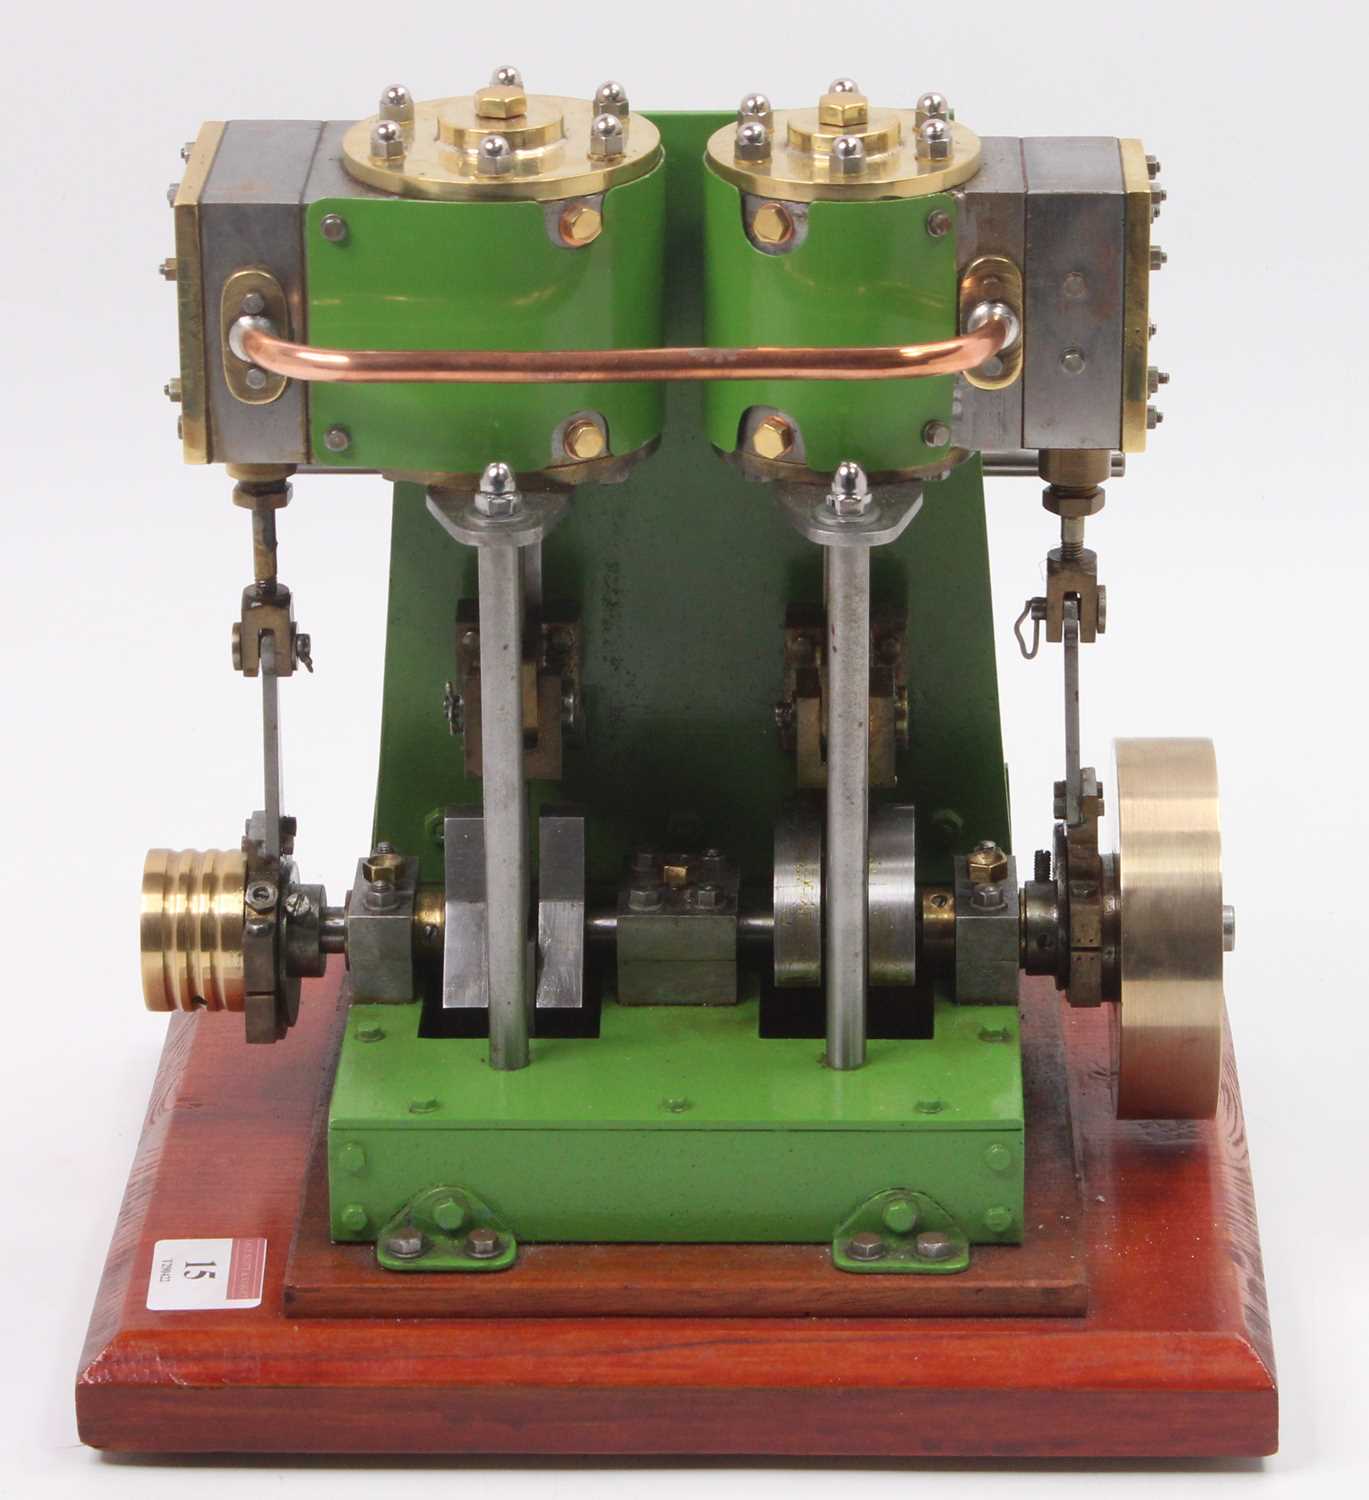 From Reeves Designs a well-constructed model of a "Regent" double crank twin cylinder compound